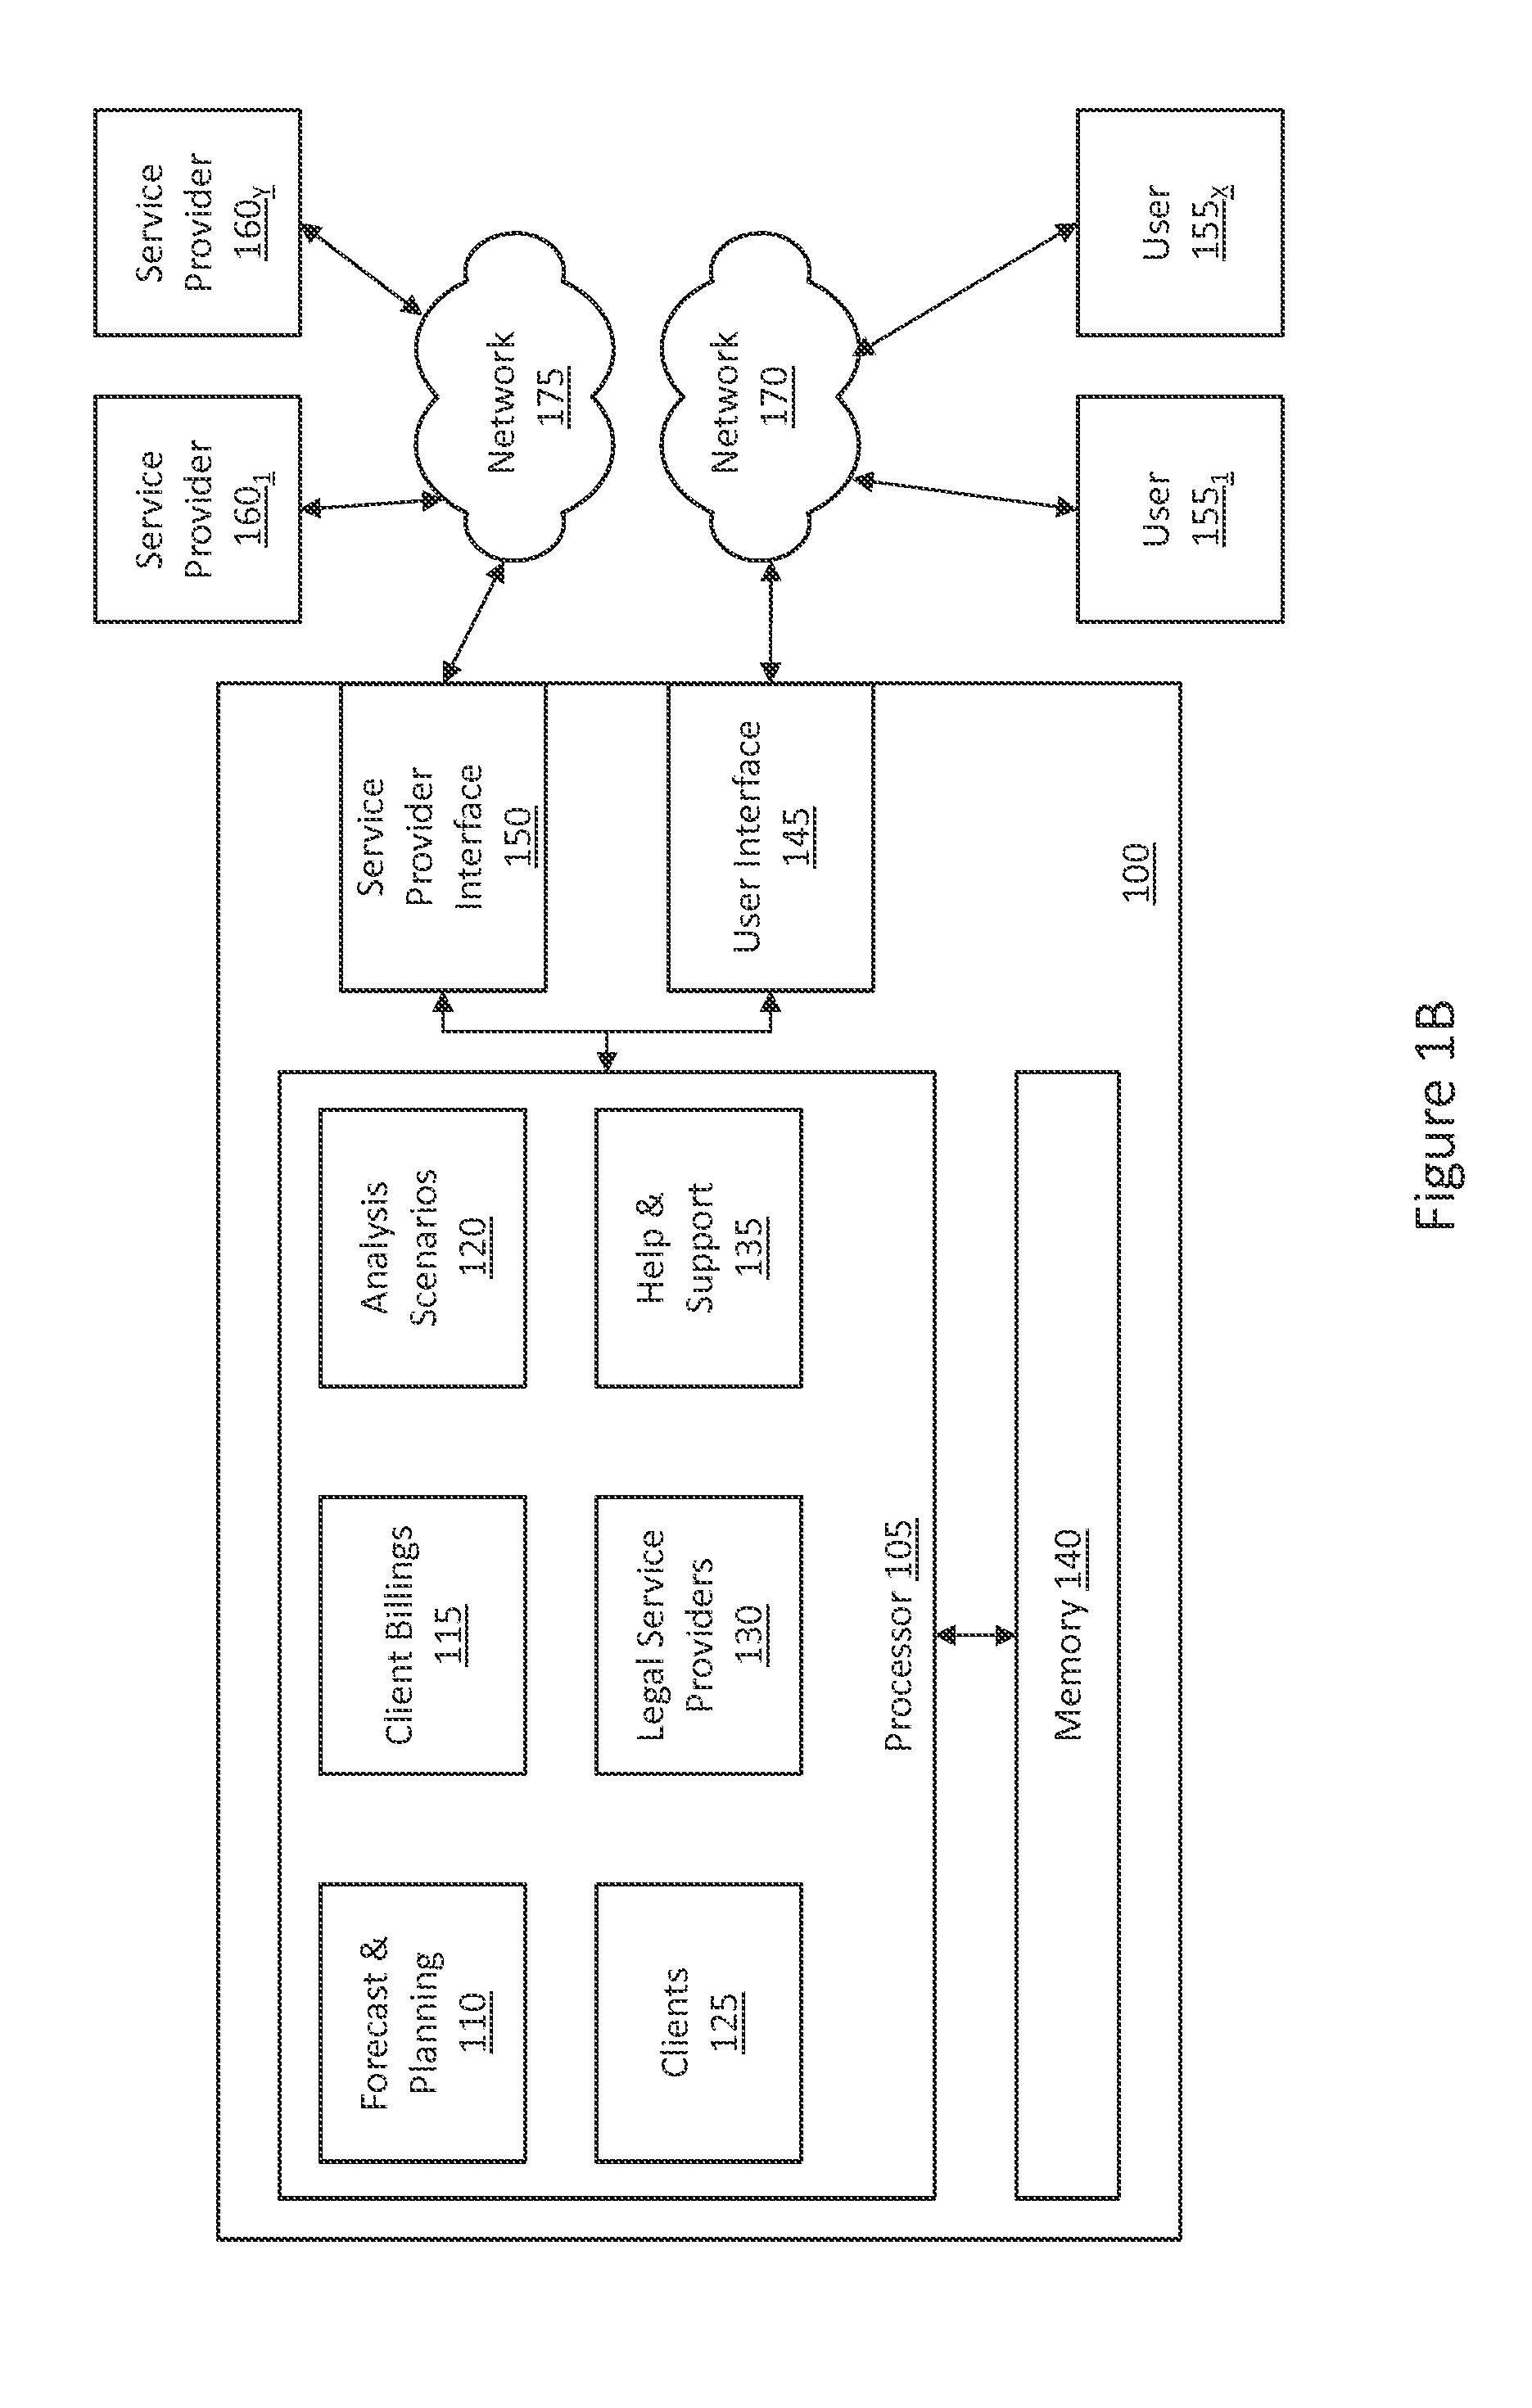 Systems and Methods for Analysis of Legal Service Providers and Comparative Unit Costs or Ratio Costs